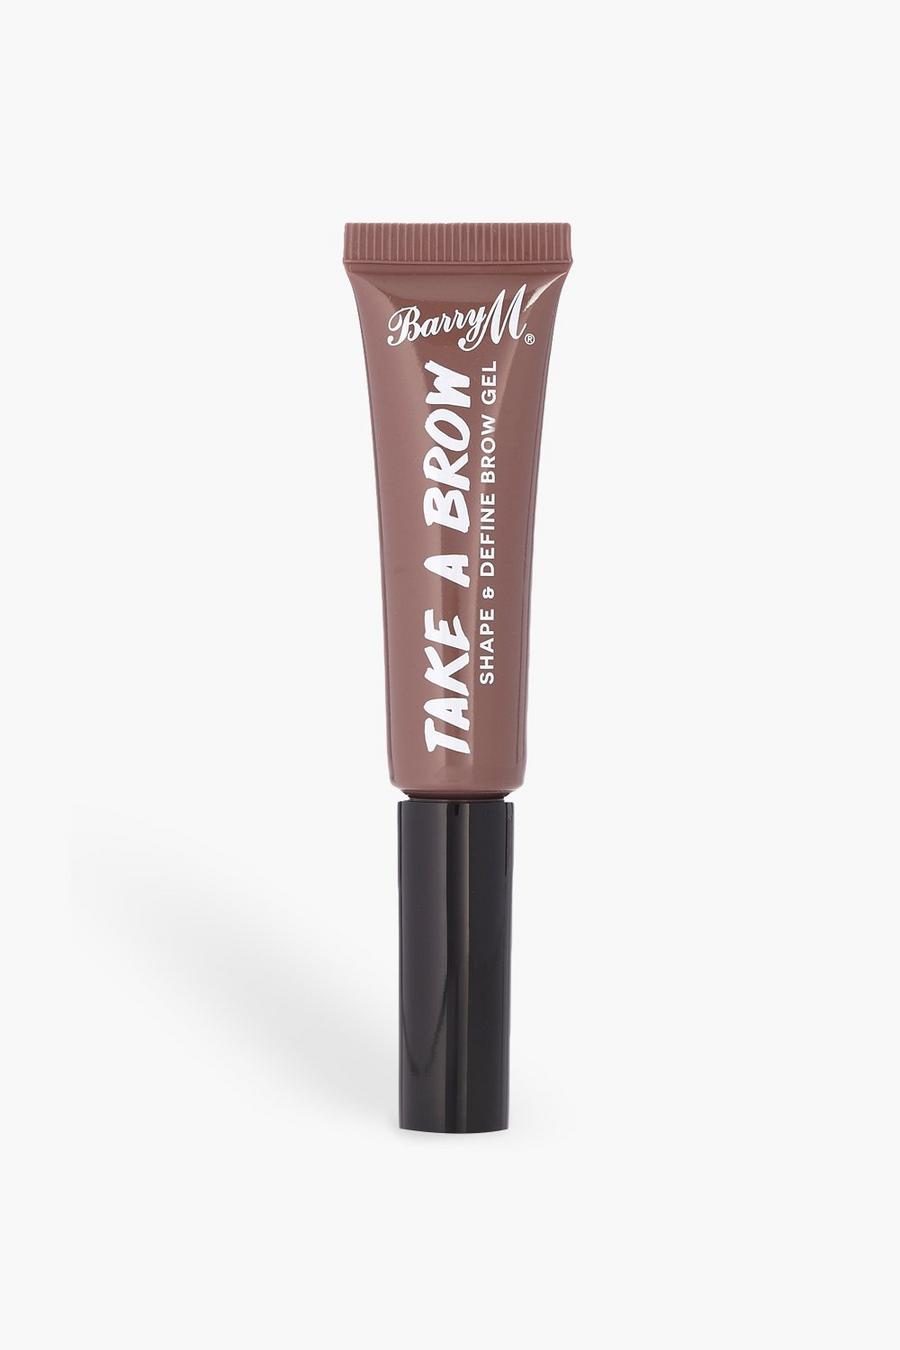 Brown Barry M Take A Brow Gel